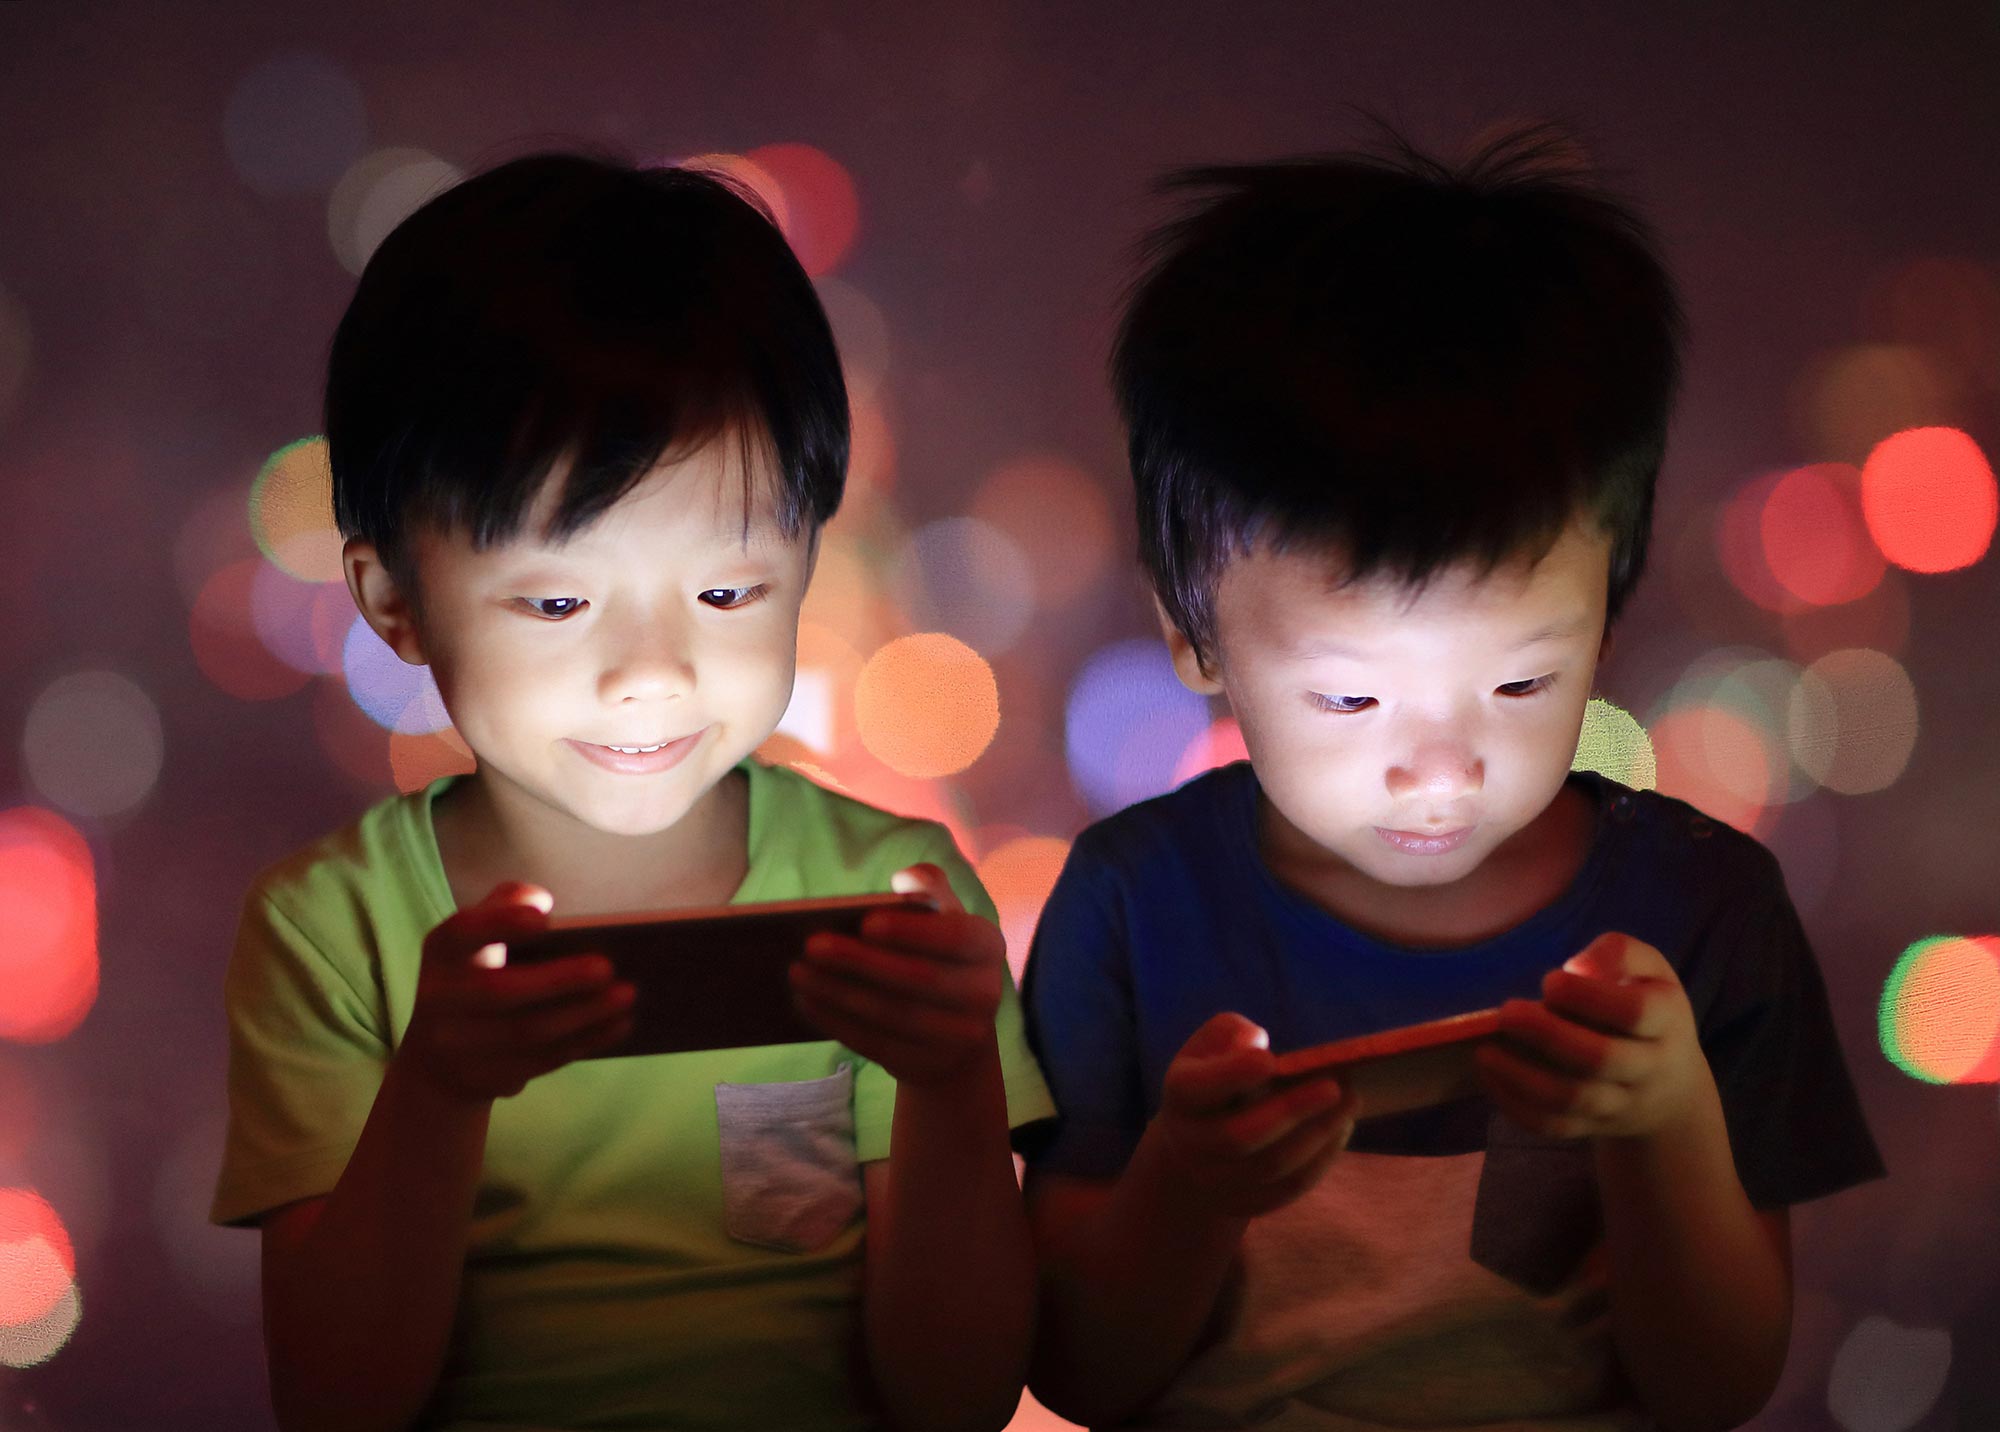 New Research Links Screen Time With Childhood Development Delays